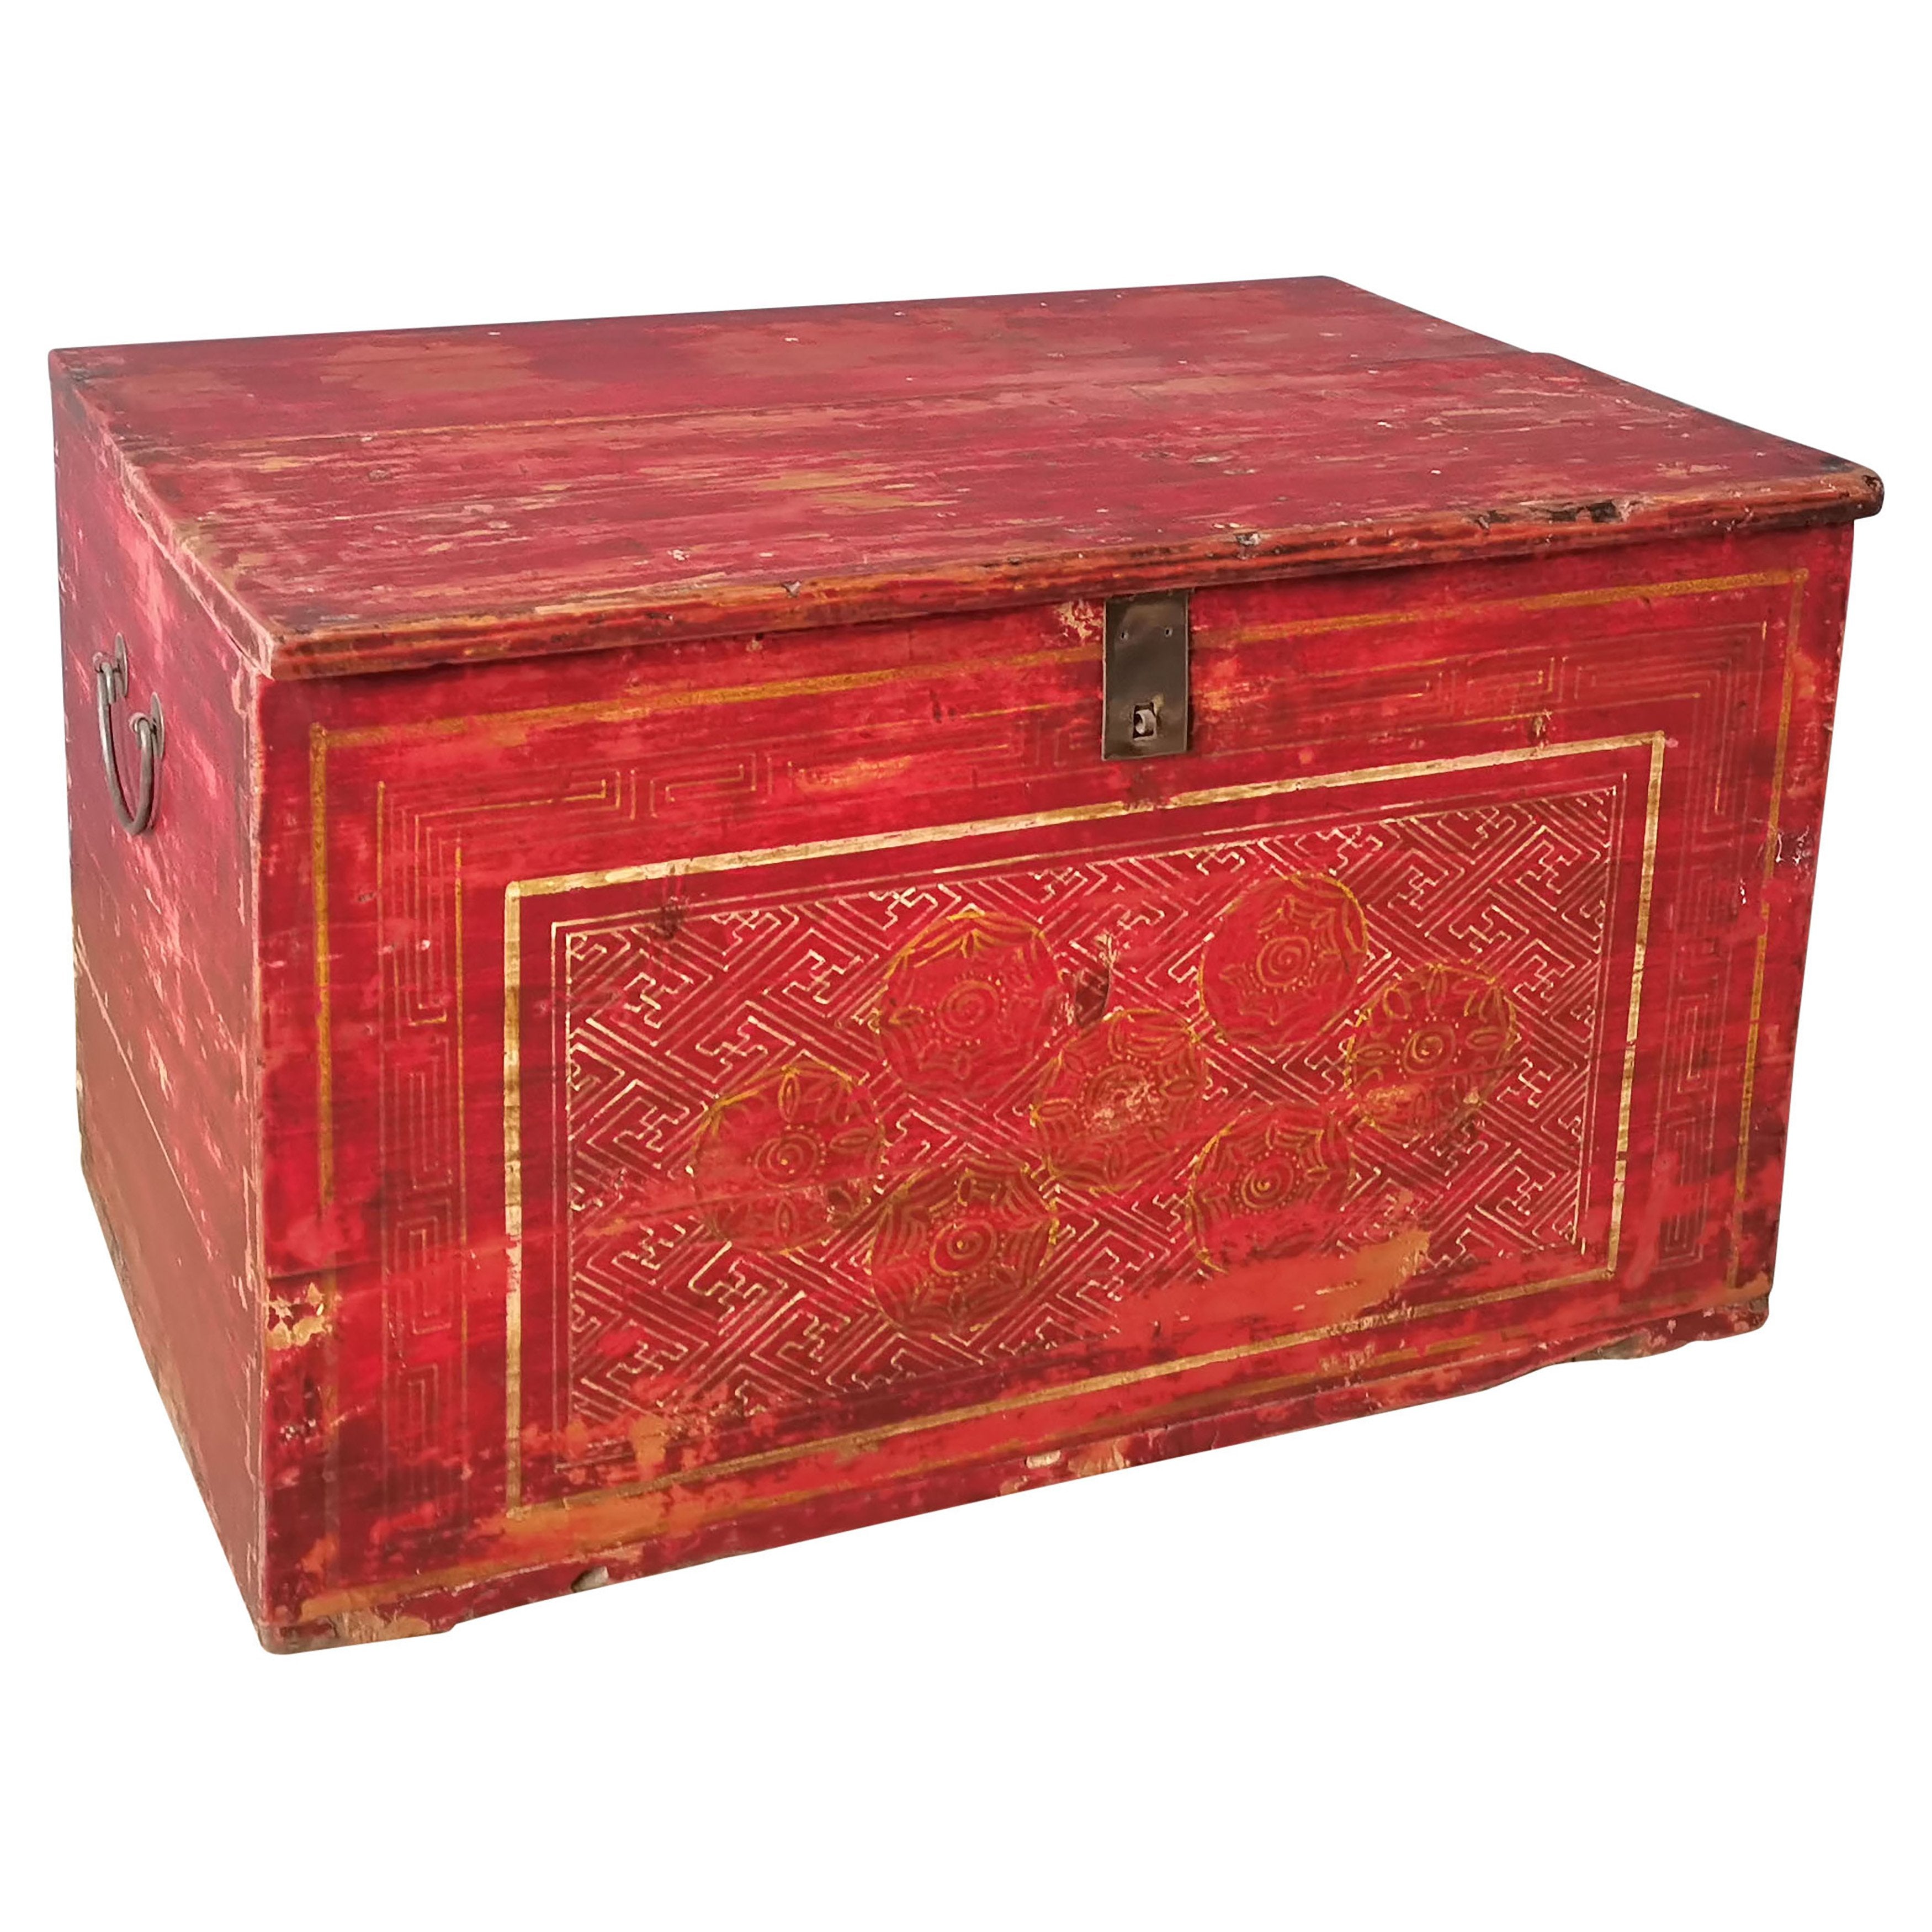 Antique Trunk Box - What A Room